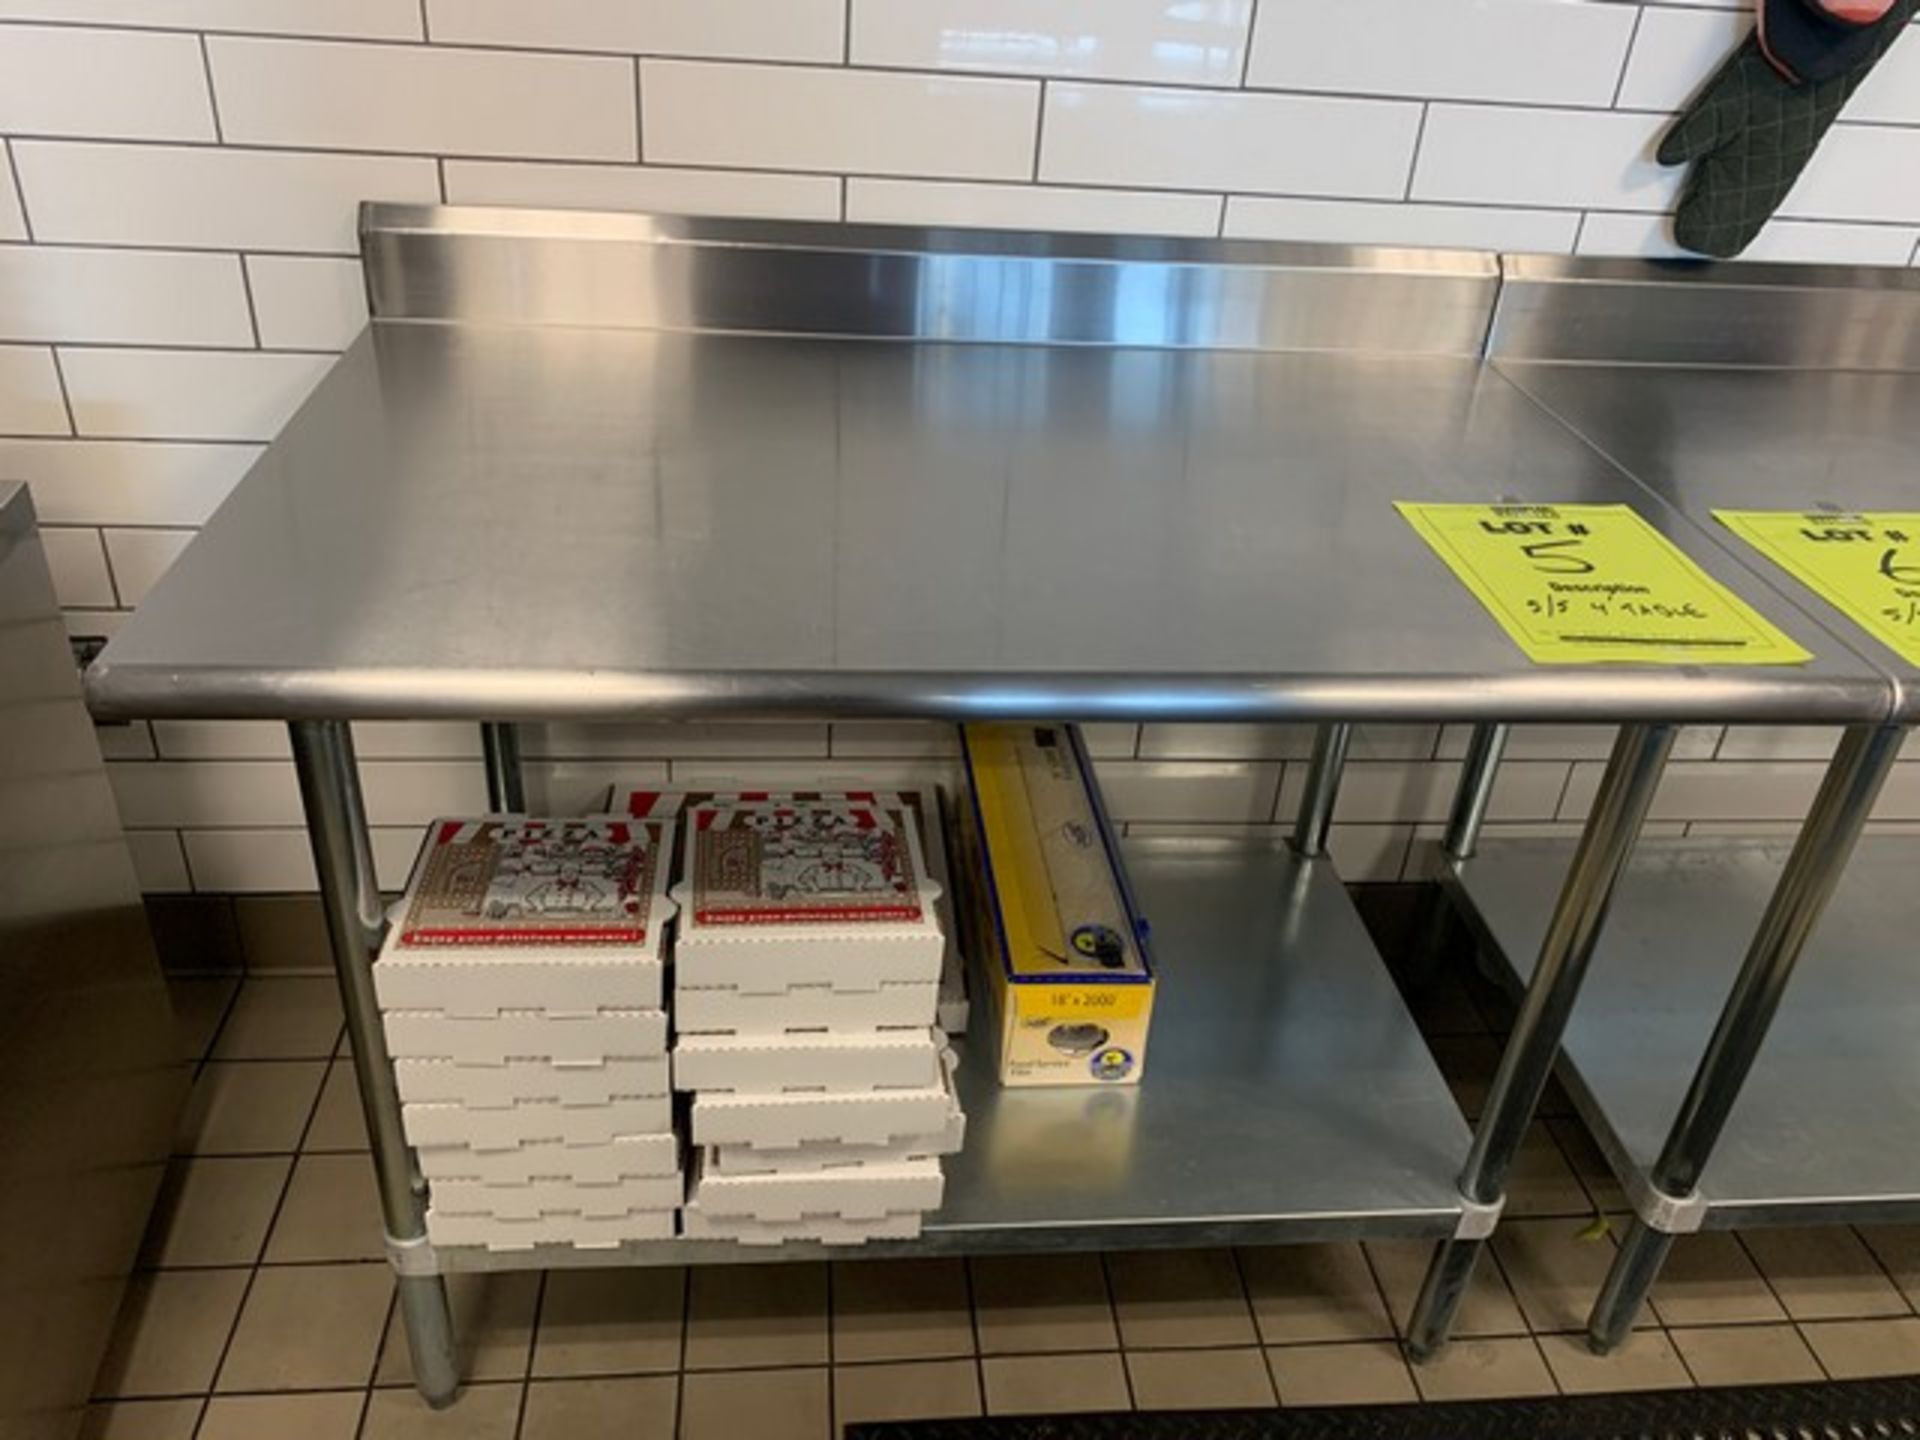 STAINLESS STEEL TABLE WITH UNDERSHELF - 4'